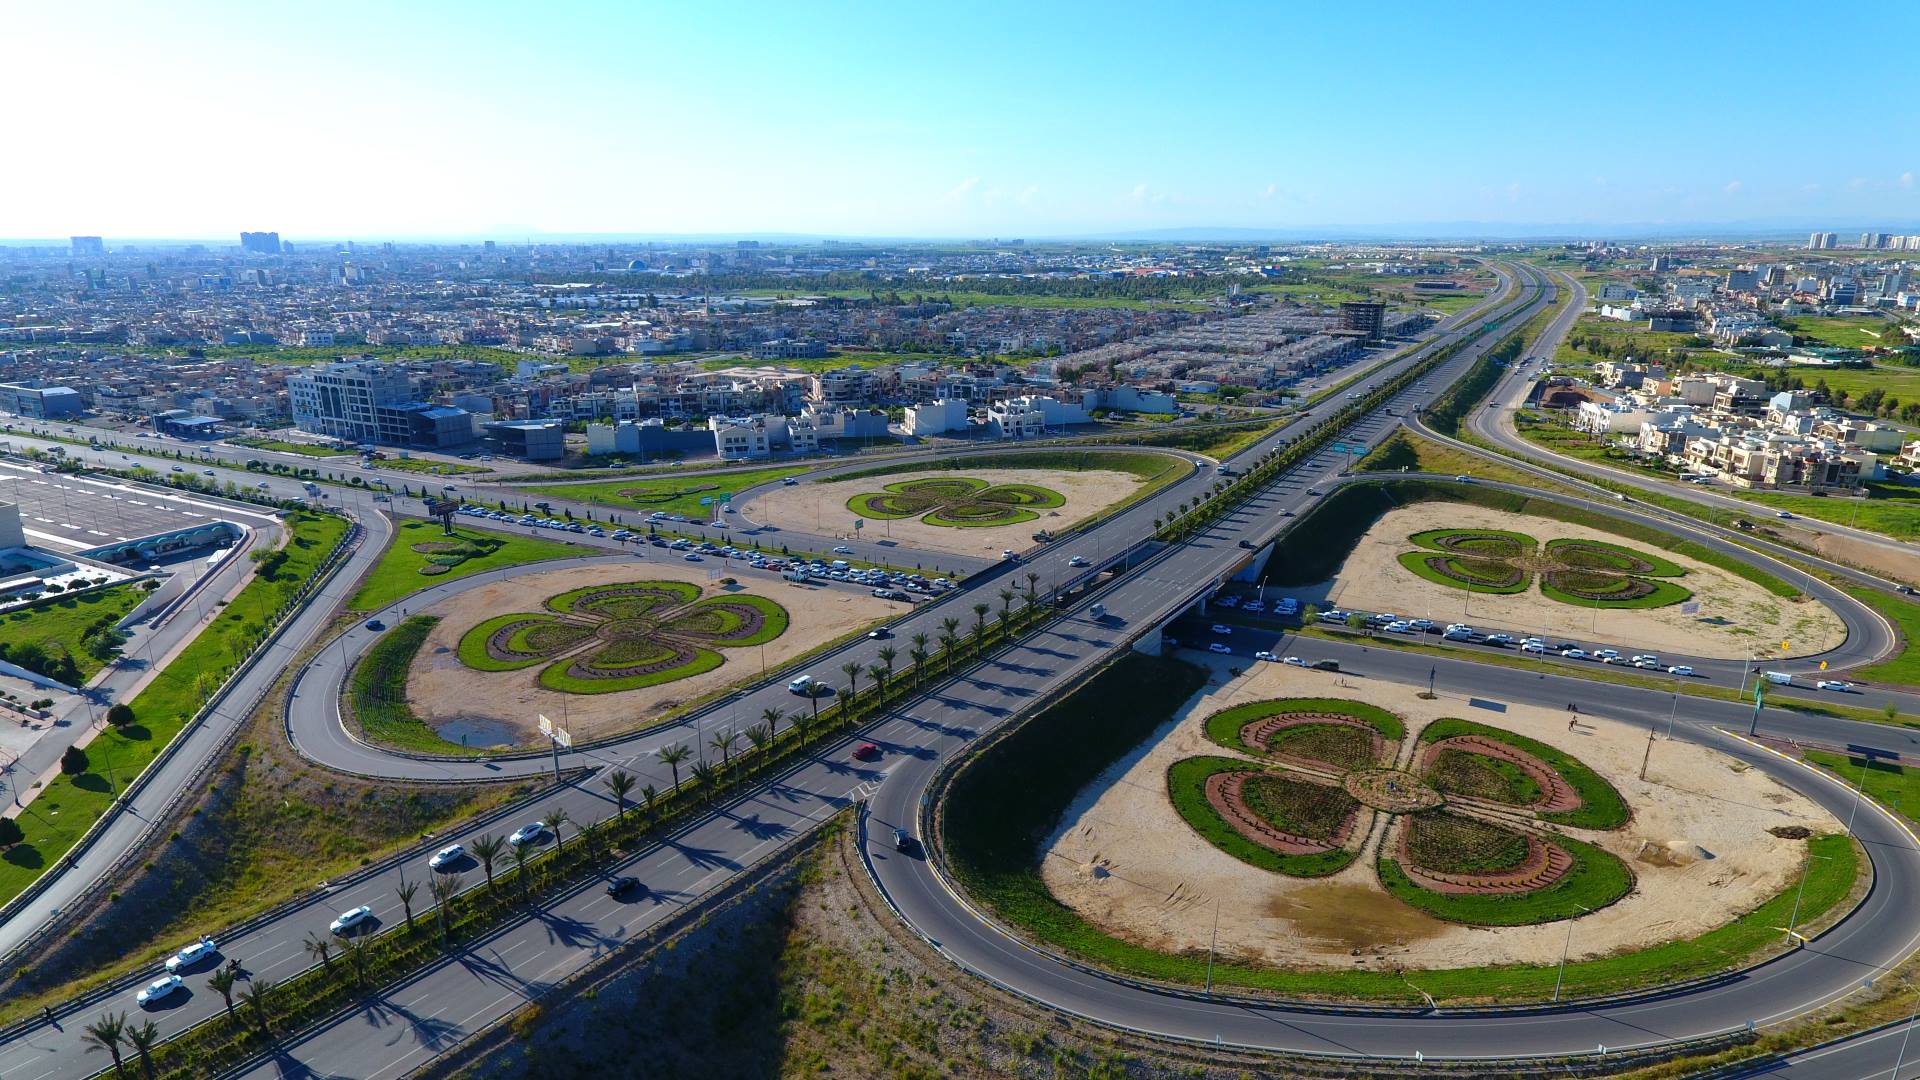 A view of 120 M. Ring Road in Erbil. (Photo: Hemn Group)